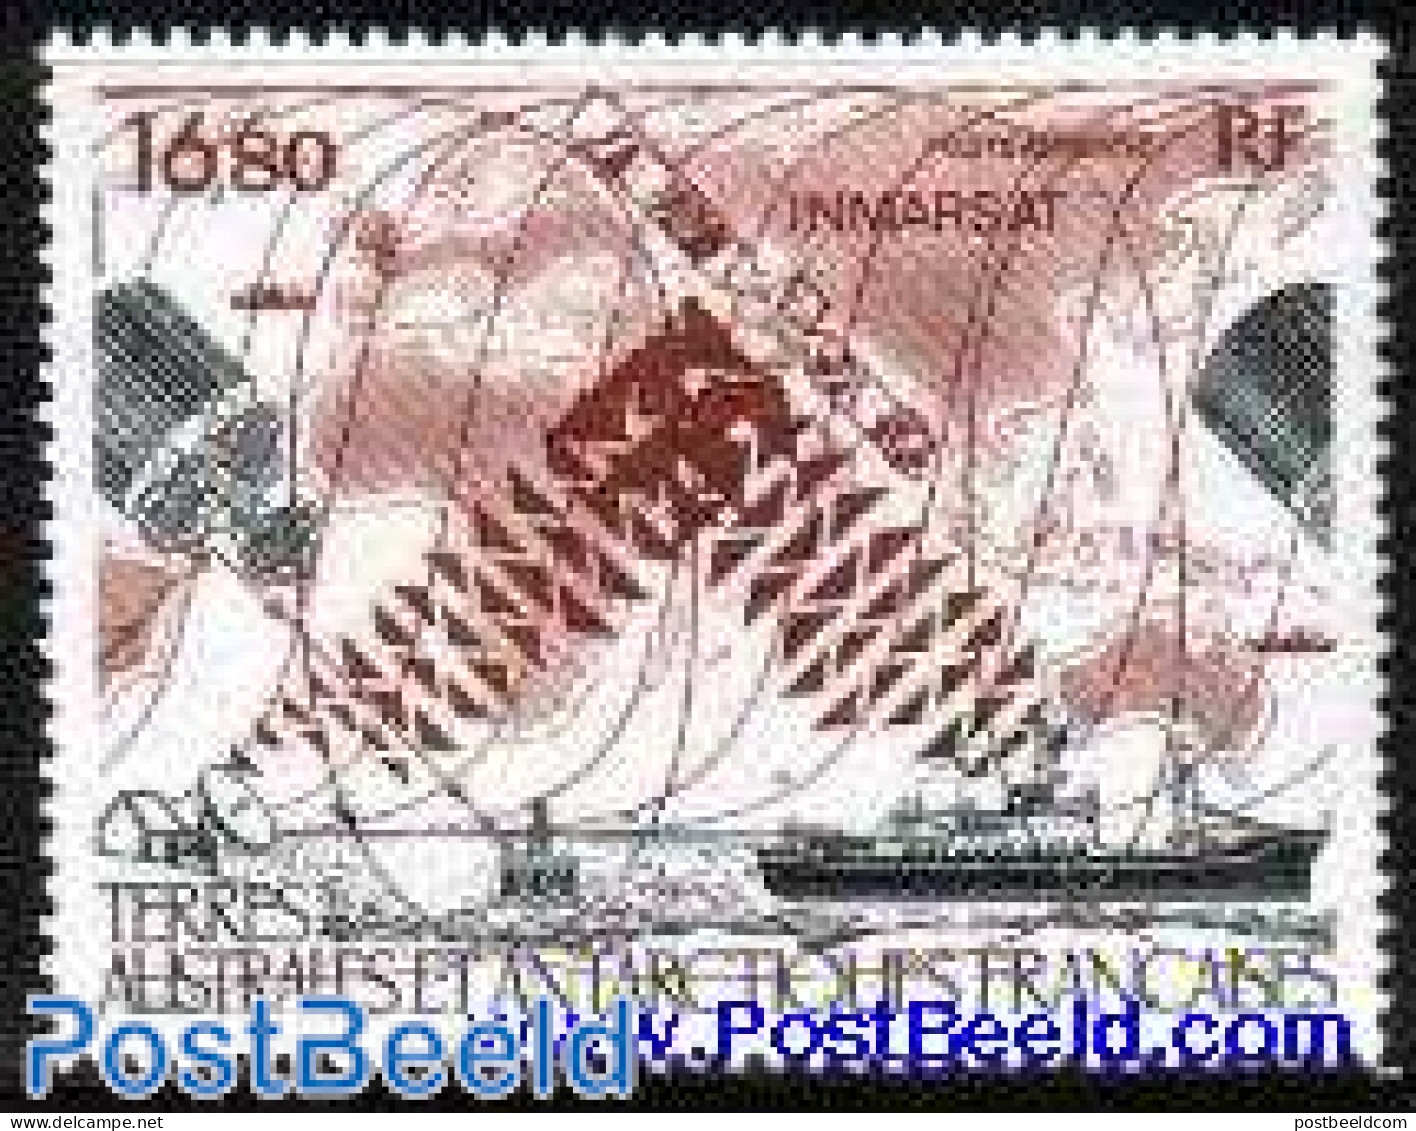 French Antarctic Territory 1987 Inmarsat 1v, Mint NH, Science - Transport - Telecommunication - Ships And Boats - Spac.. - Nuevos